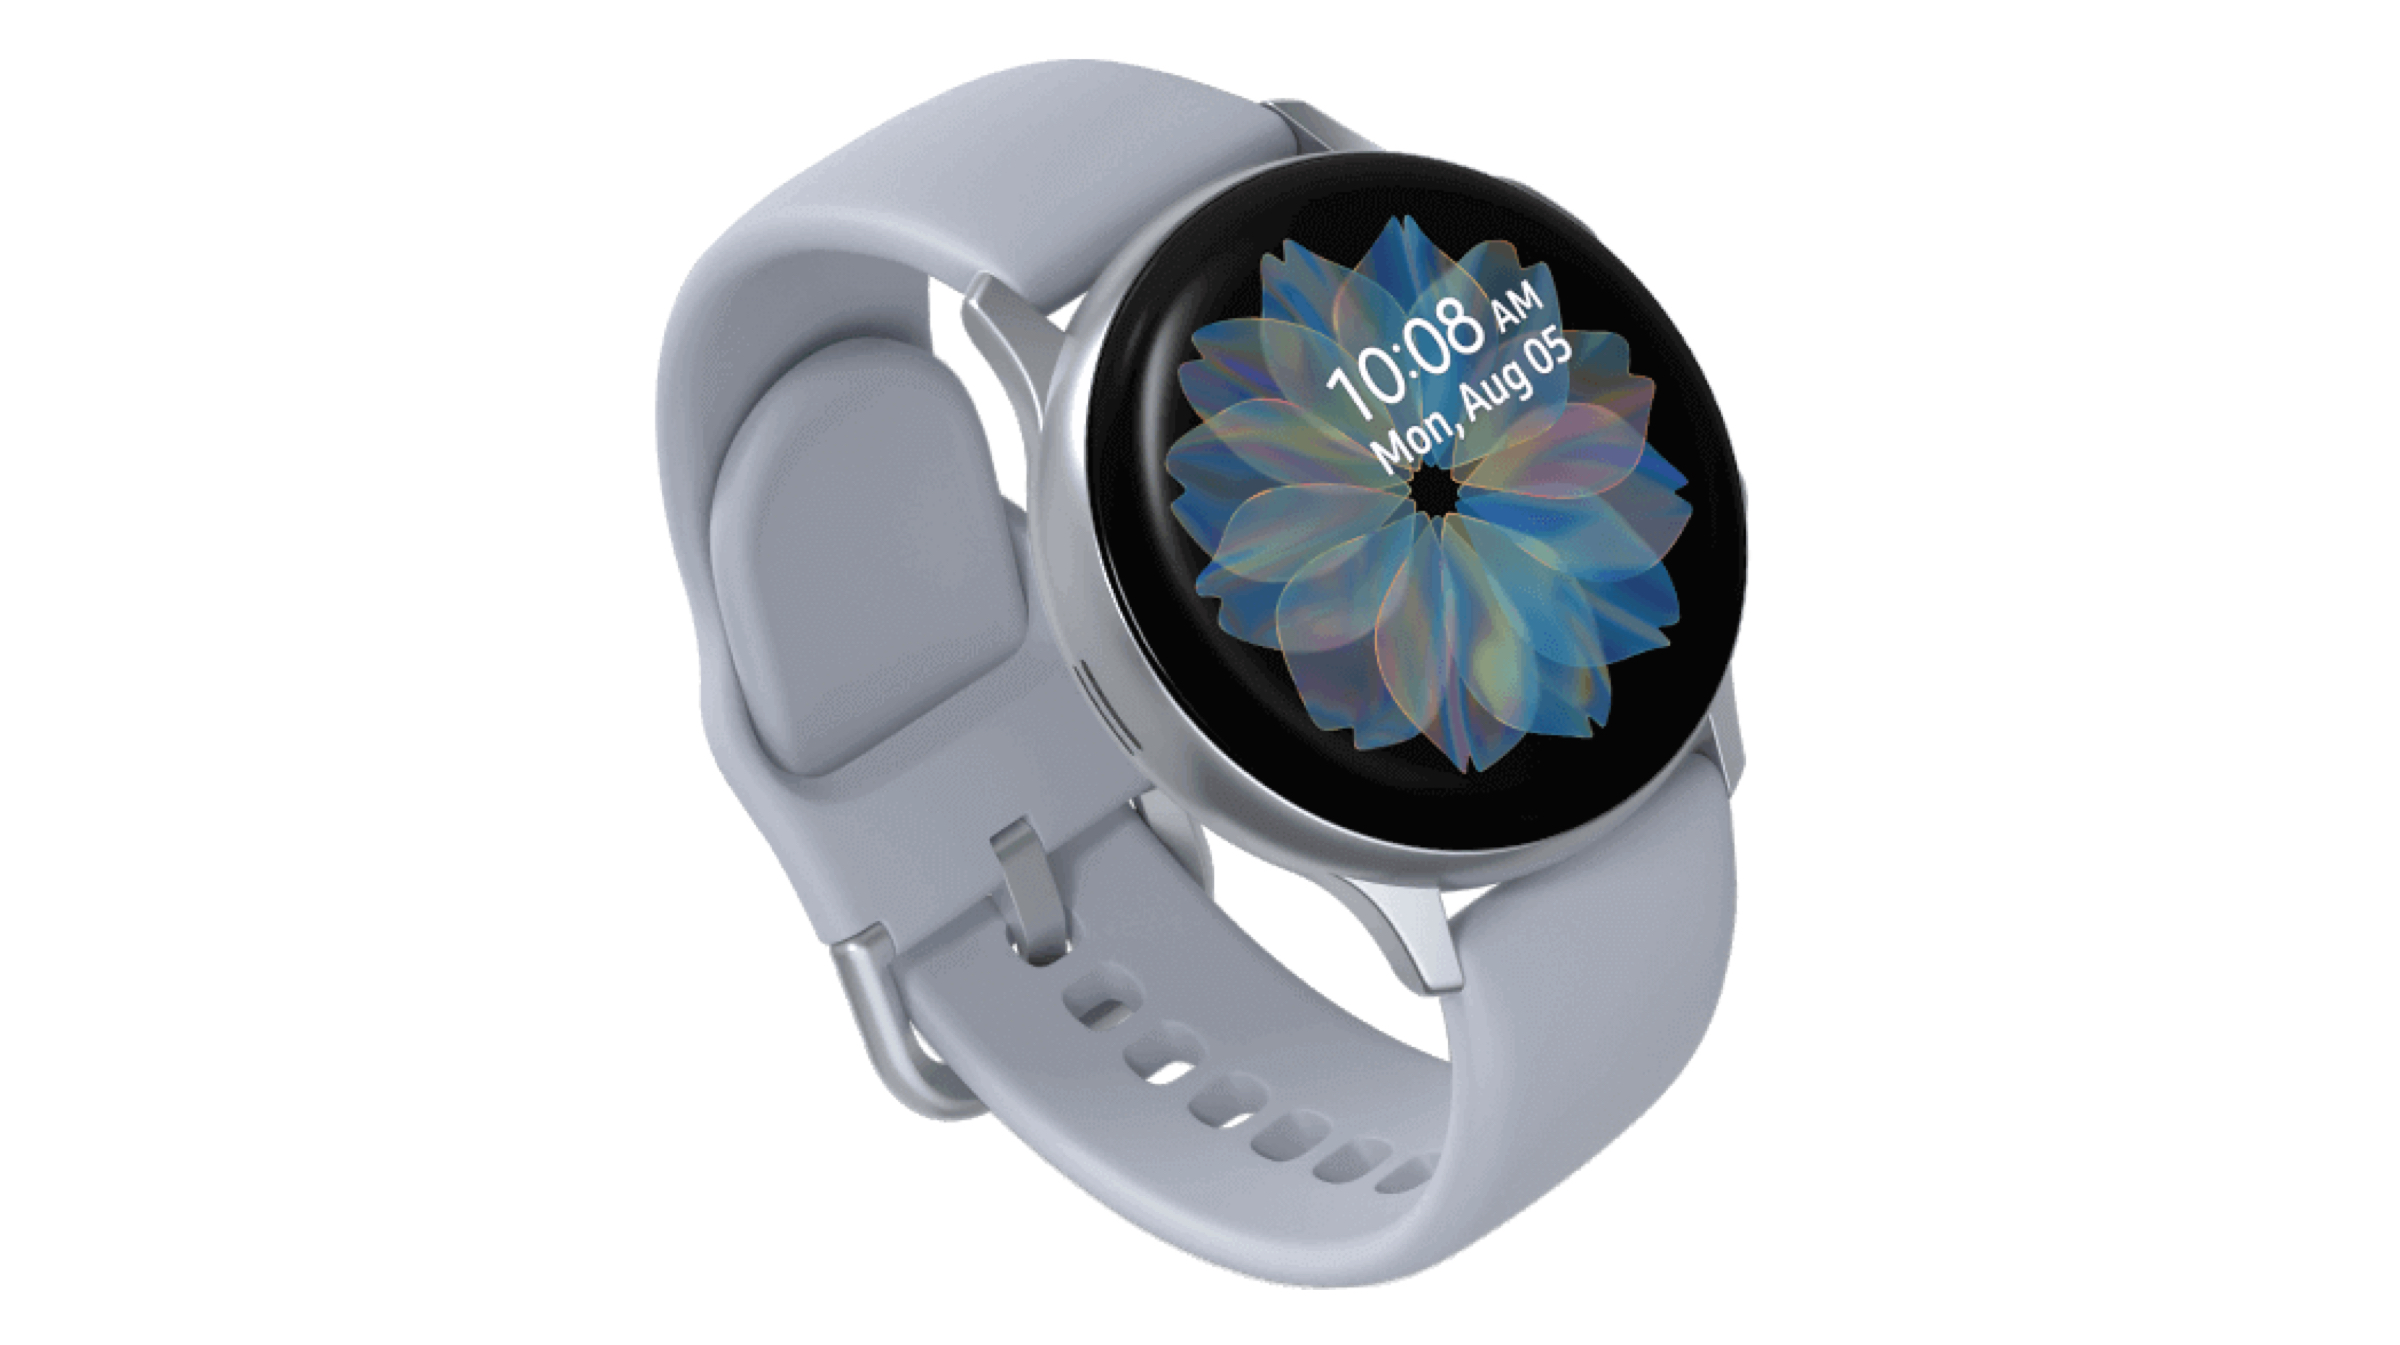 Samsung Galaxy Watch Active 2 Launched, Full Specs & Price